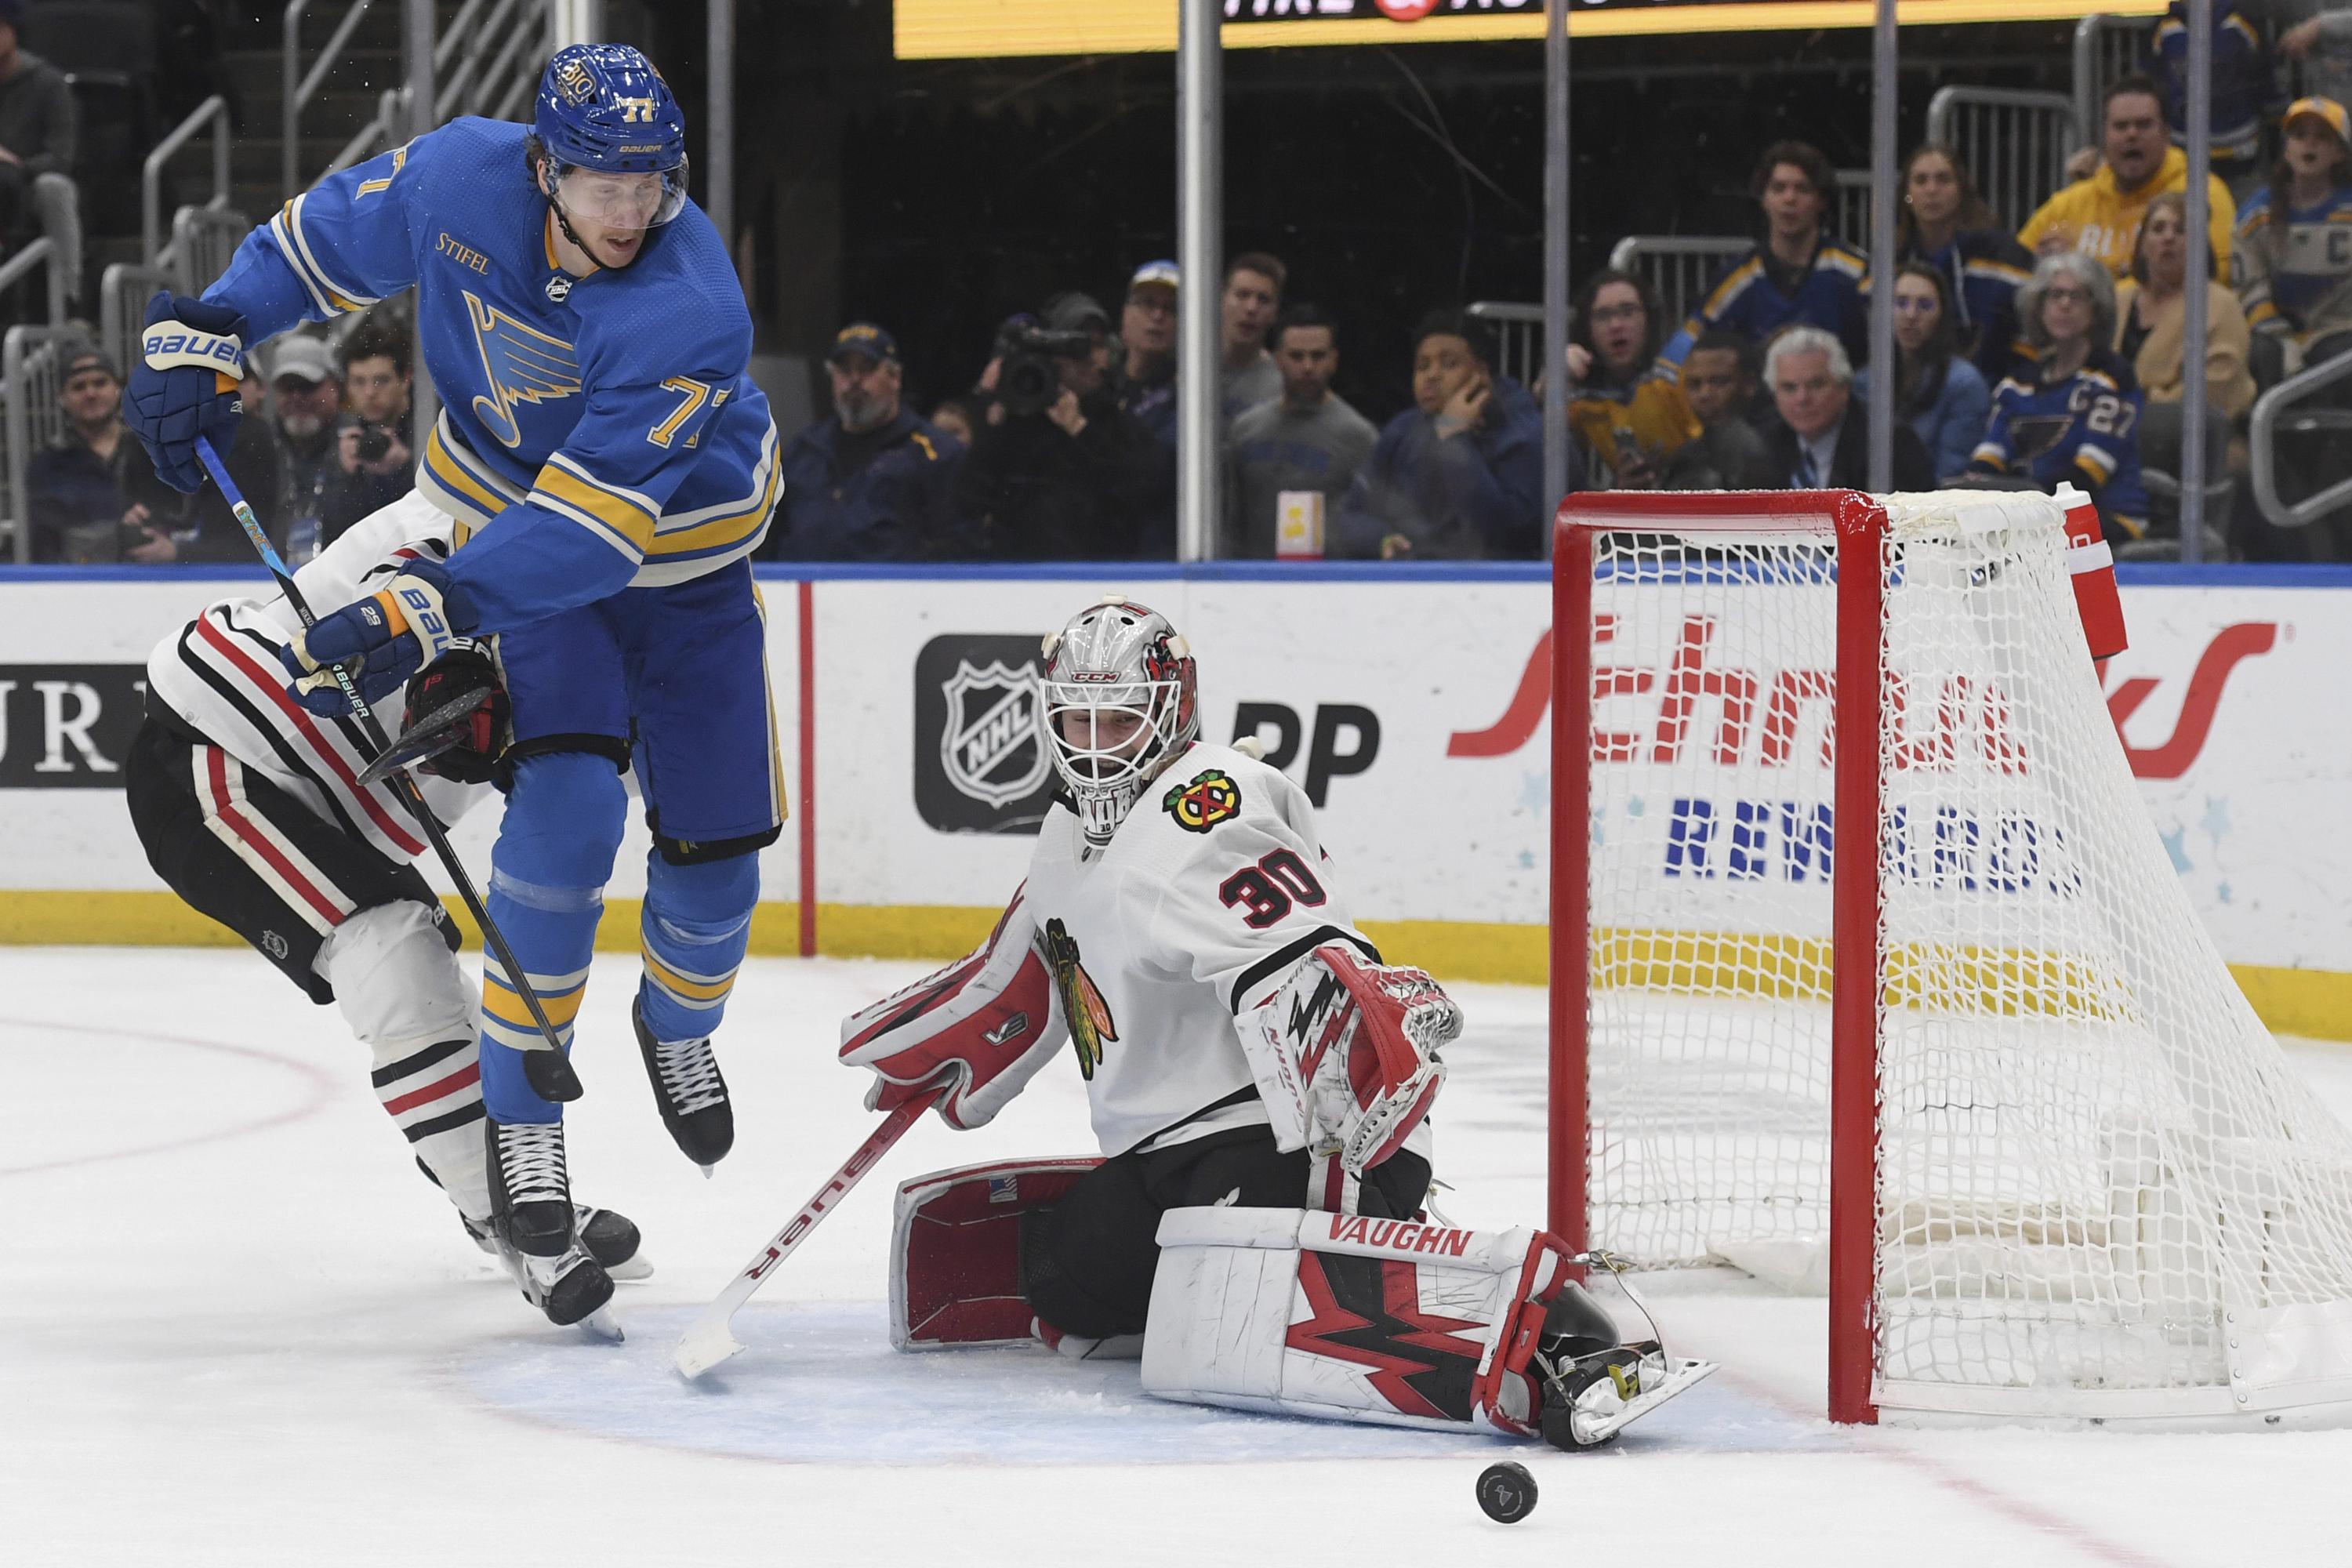 Jake Neighbours scores 2 goals as St. Louis Blues beat Chicago